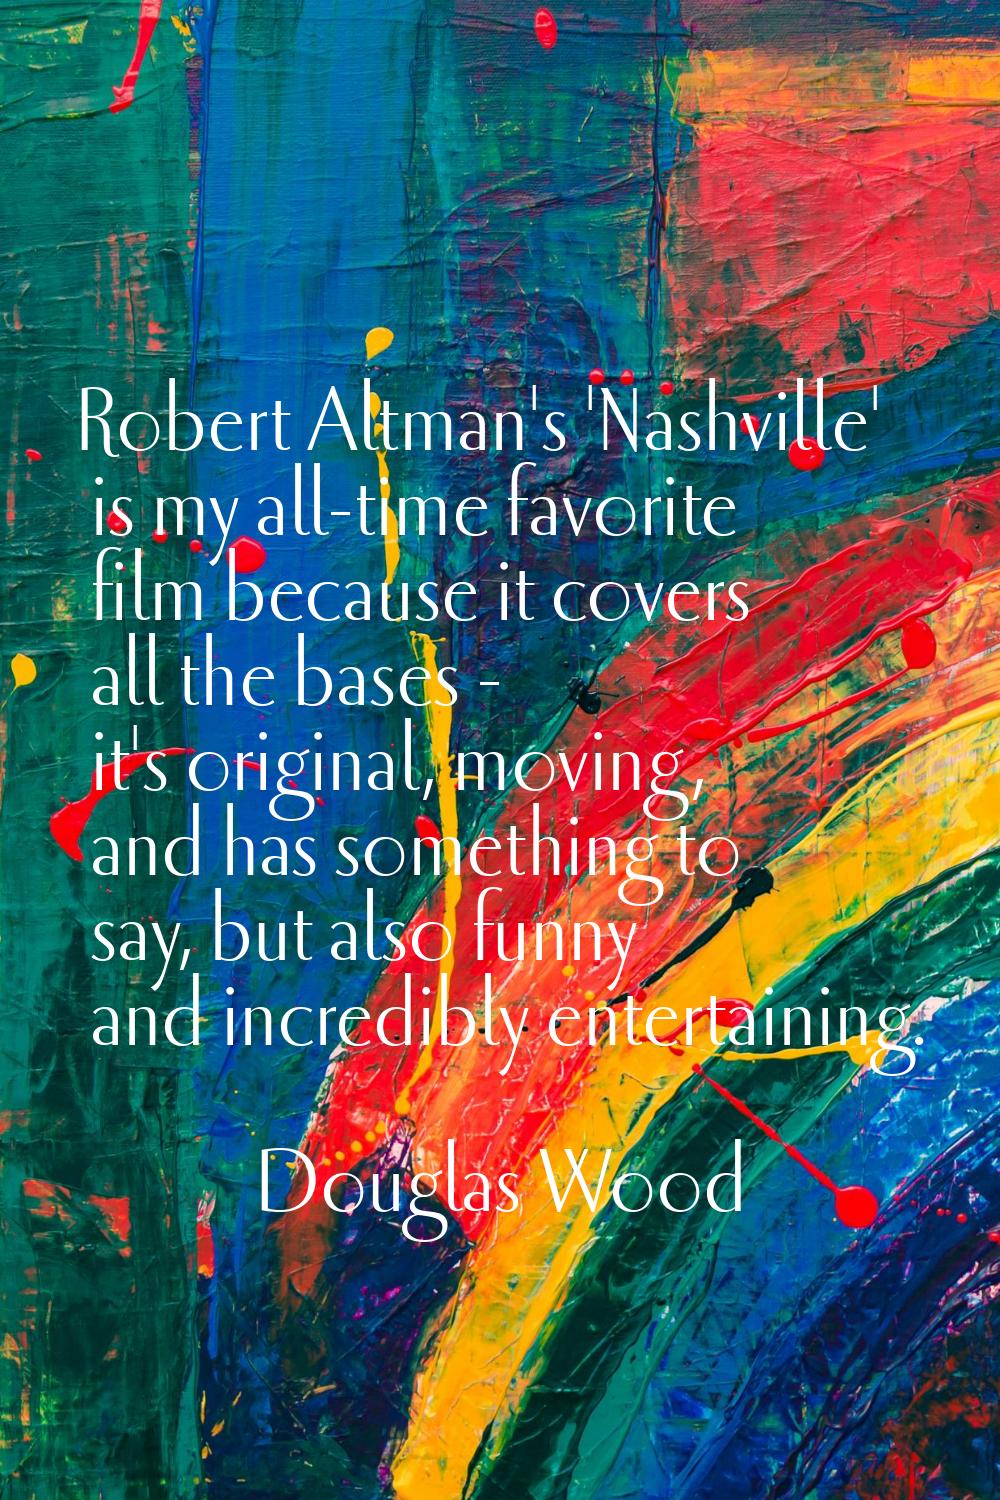 Robert Altman's 'Nashville' is my all-time favorite film because it covers all the bases - it's ori